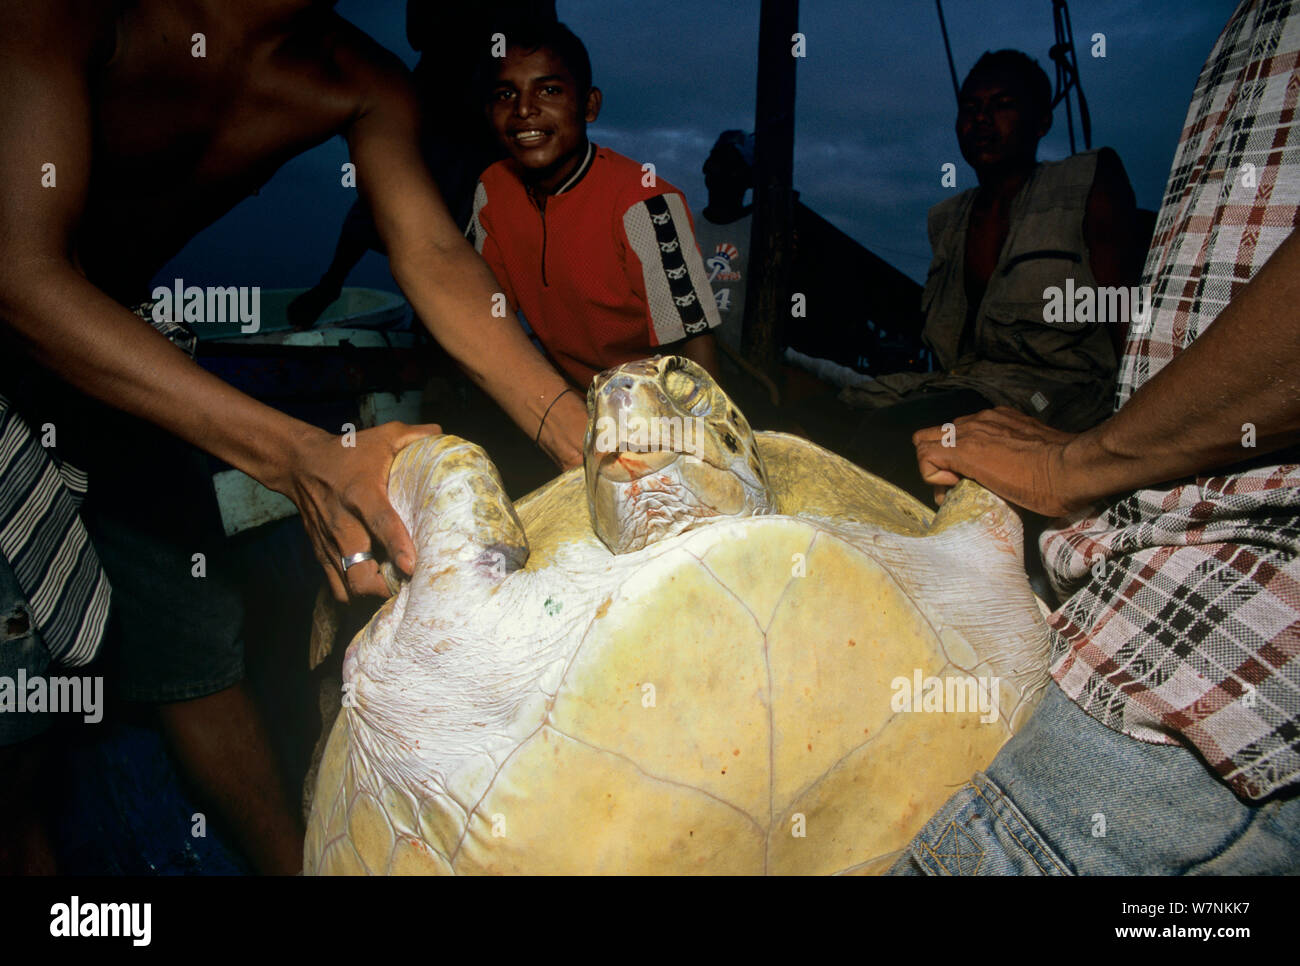 Green Turtle (Chelonia mydas) catch shown off by Miskito Indian fishermen, Puerto Cabezas, Nicaragua, Caribbean Sea Model released. Stock Photo